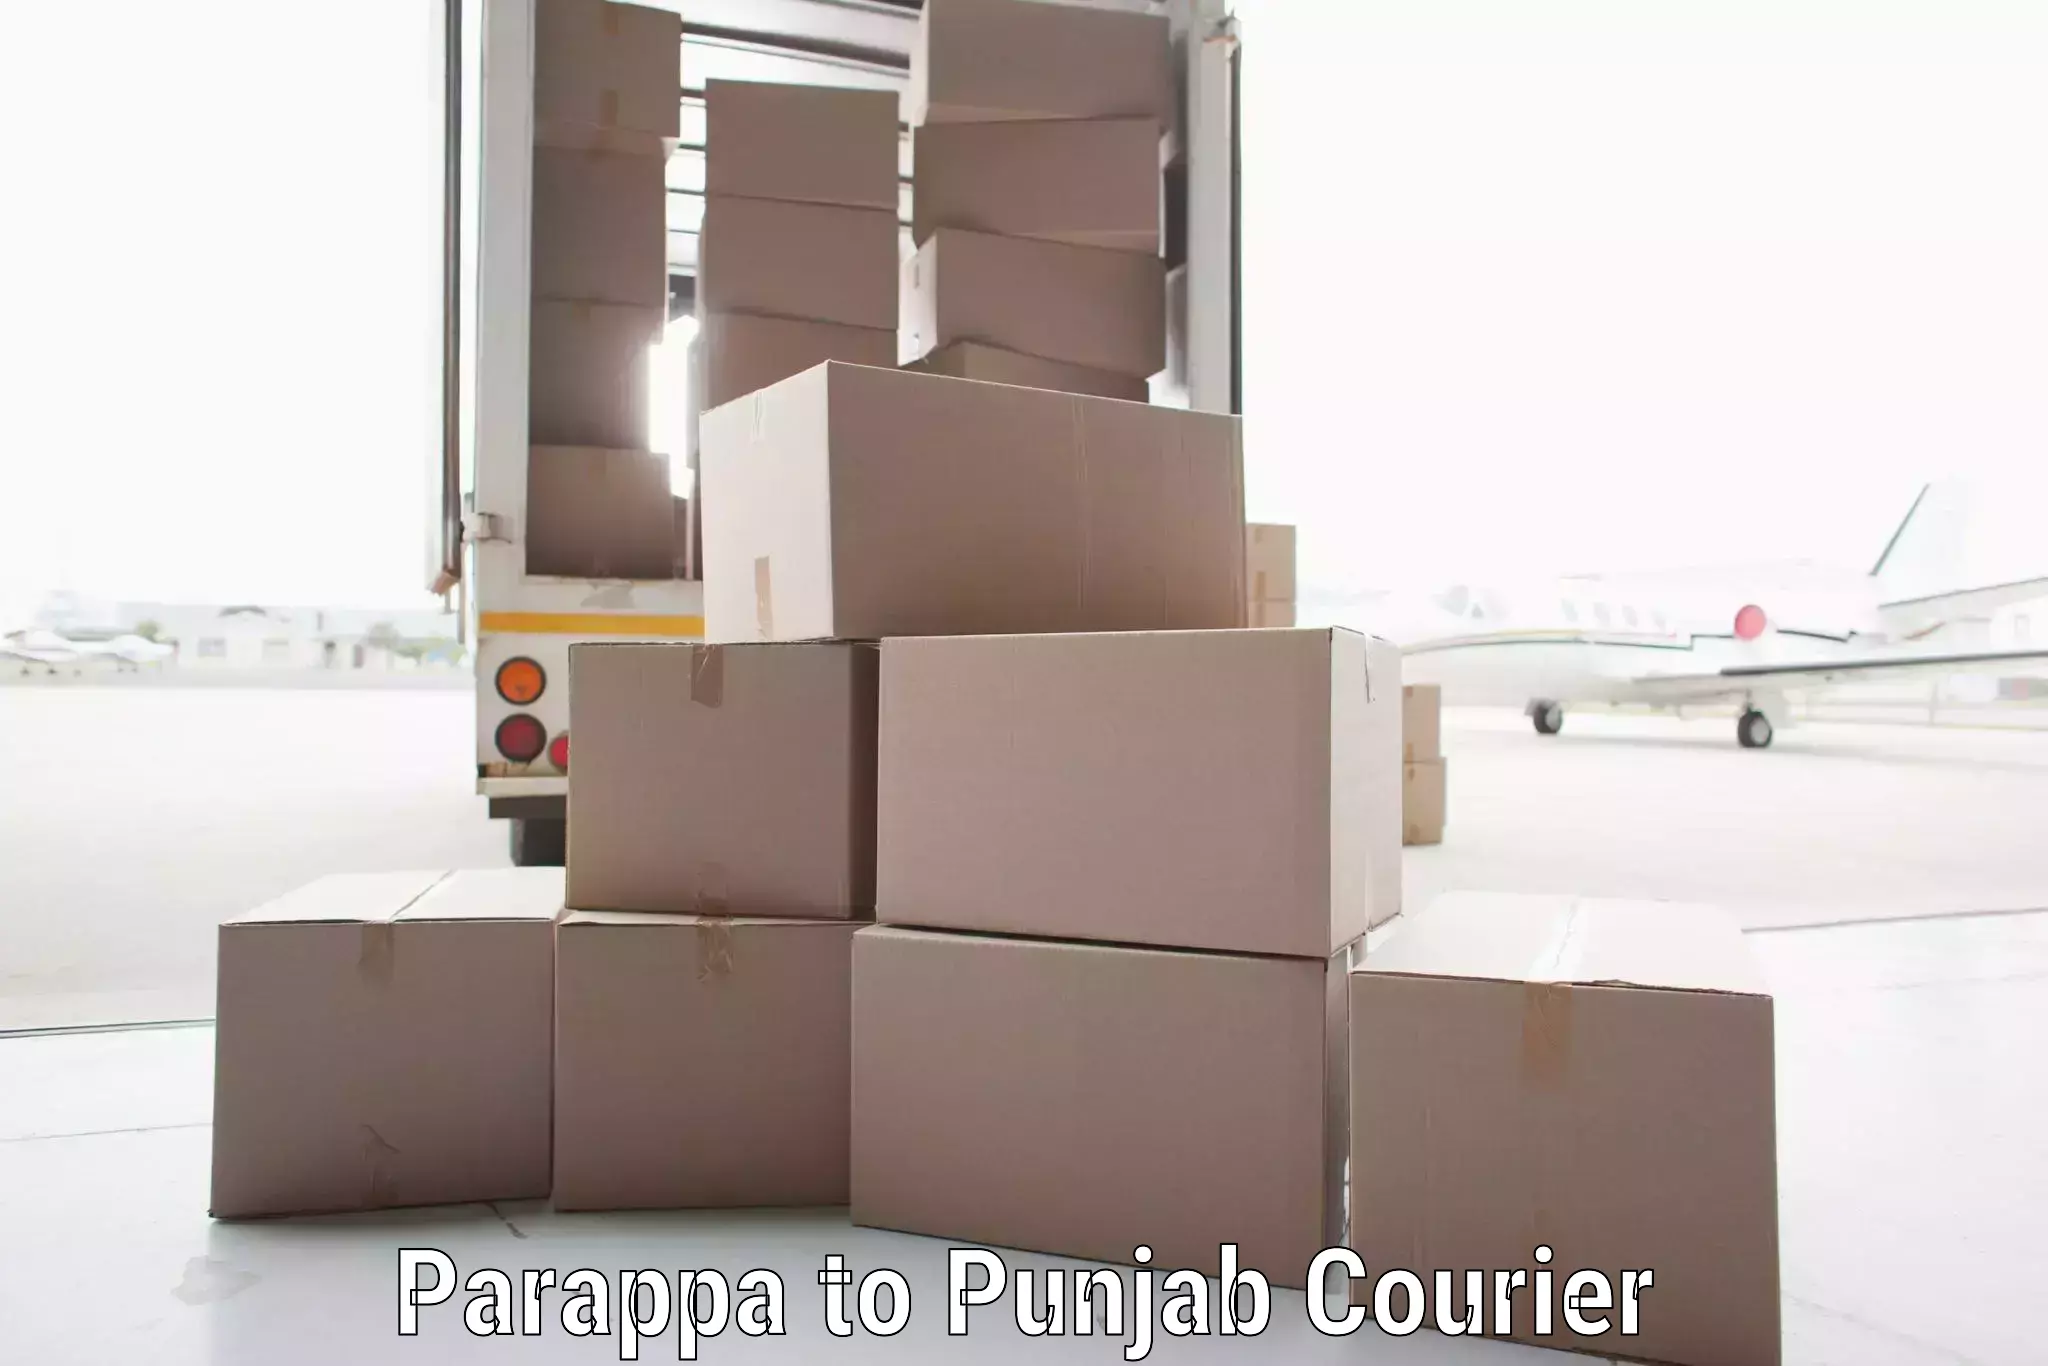 Next-generation courier services Parappa to Dhuri